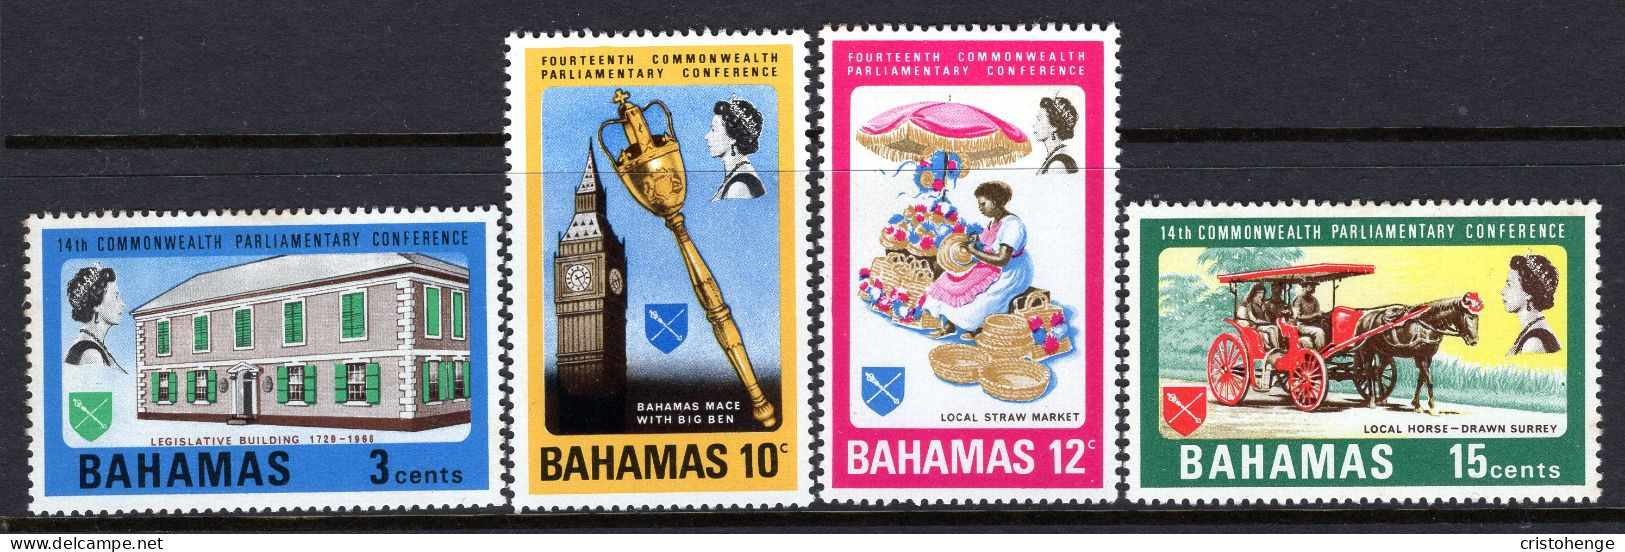 Bahamas 1968 14th Parliamentary Conference Set HM (SG 323-326) - 1963-1973 Ministerial Government